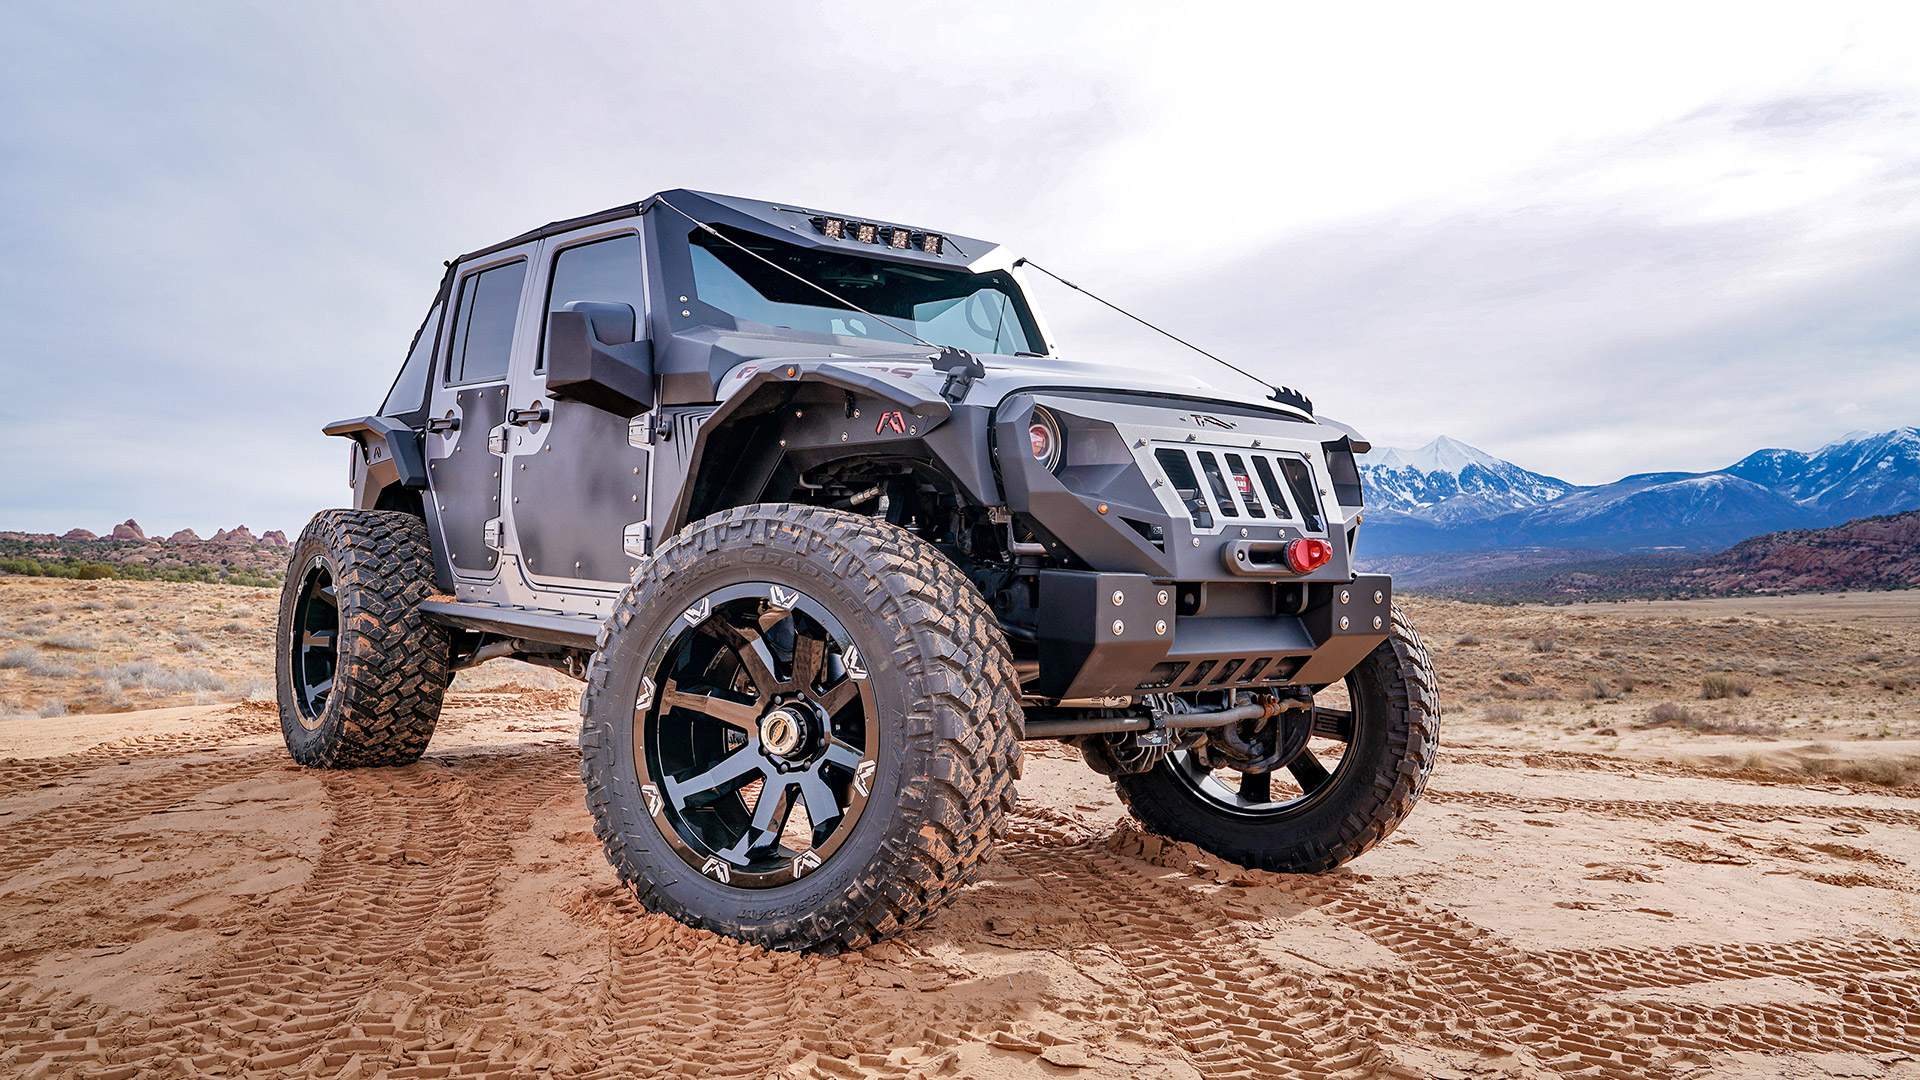 Jeep Accessories, Bumpers and Roof Racks | Fab Fours